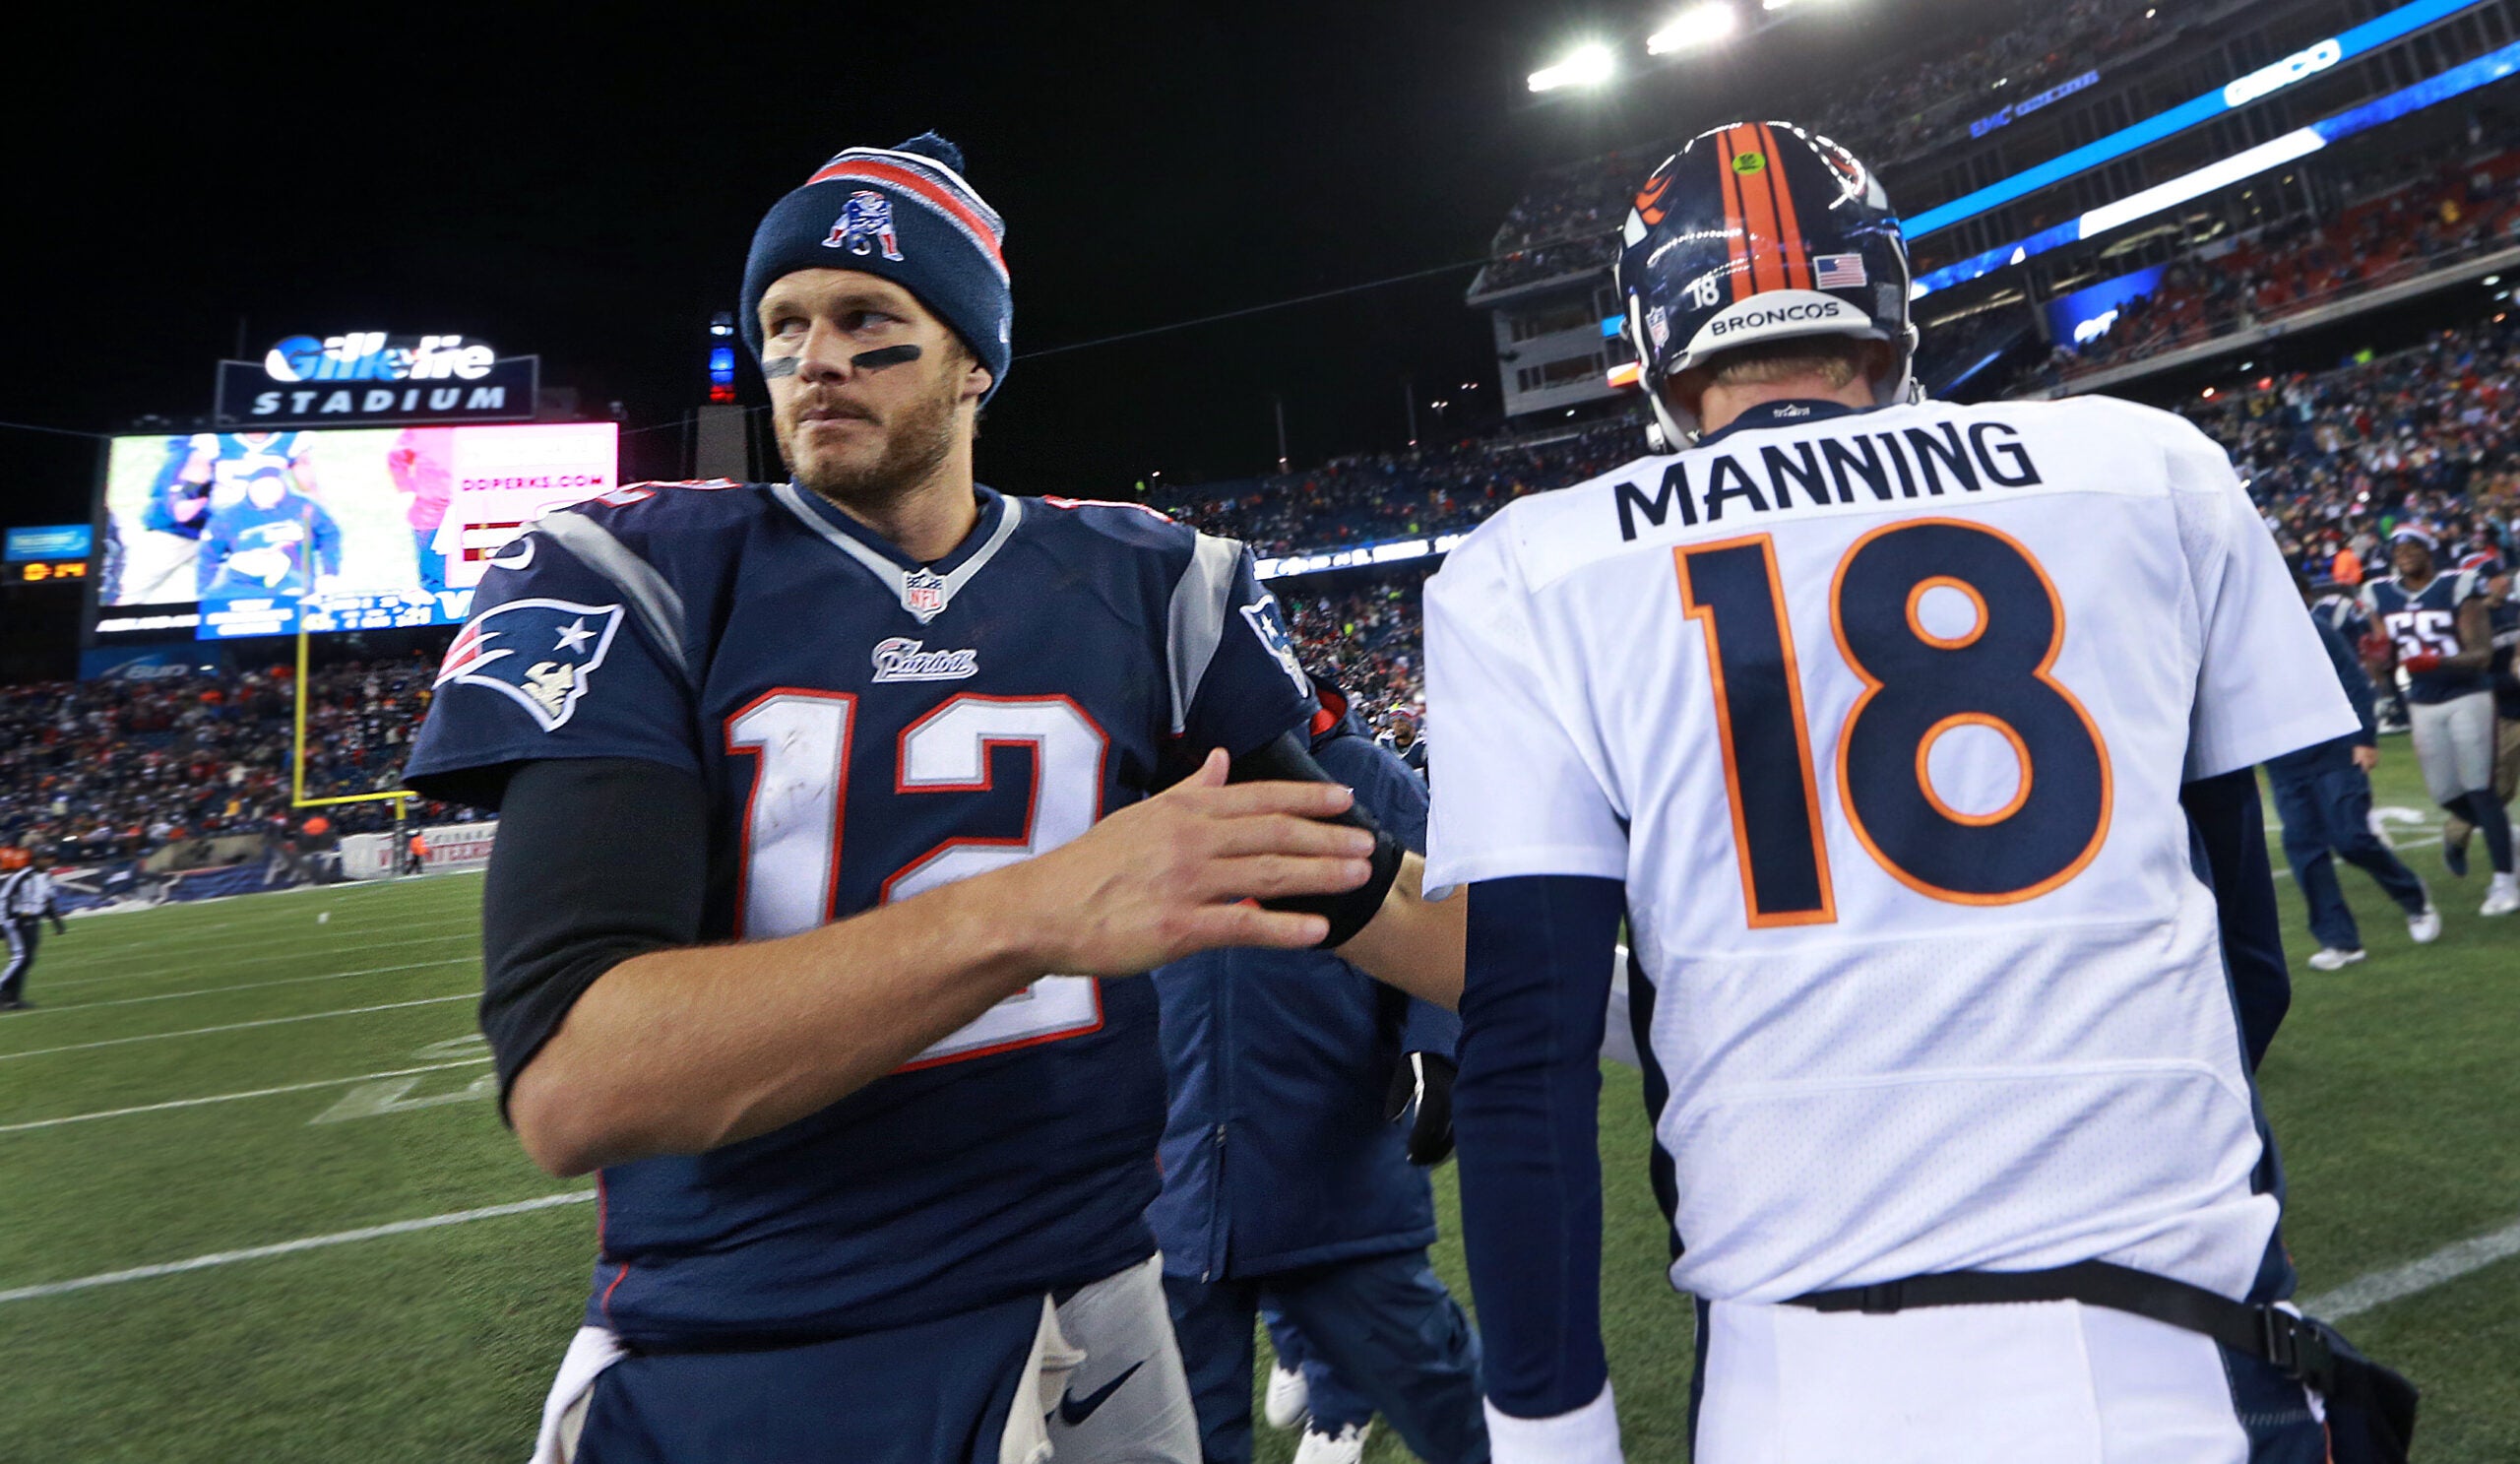 As the final 15 seconds tick off the clock, Broncos quarterback Peyton Manning (left) and Tom Brady (right) meet quickly, shook hands even quicker and then they seperated. The New England Patriots hosted the Denver Broncos in a regular season NFL game at Gillete Stadium.